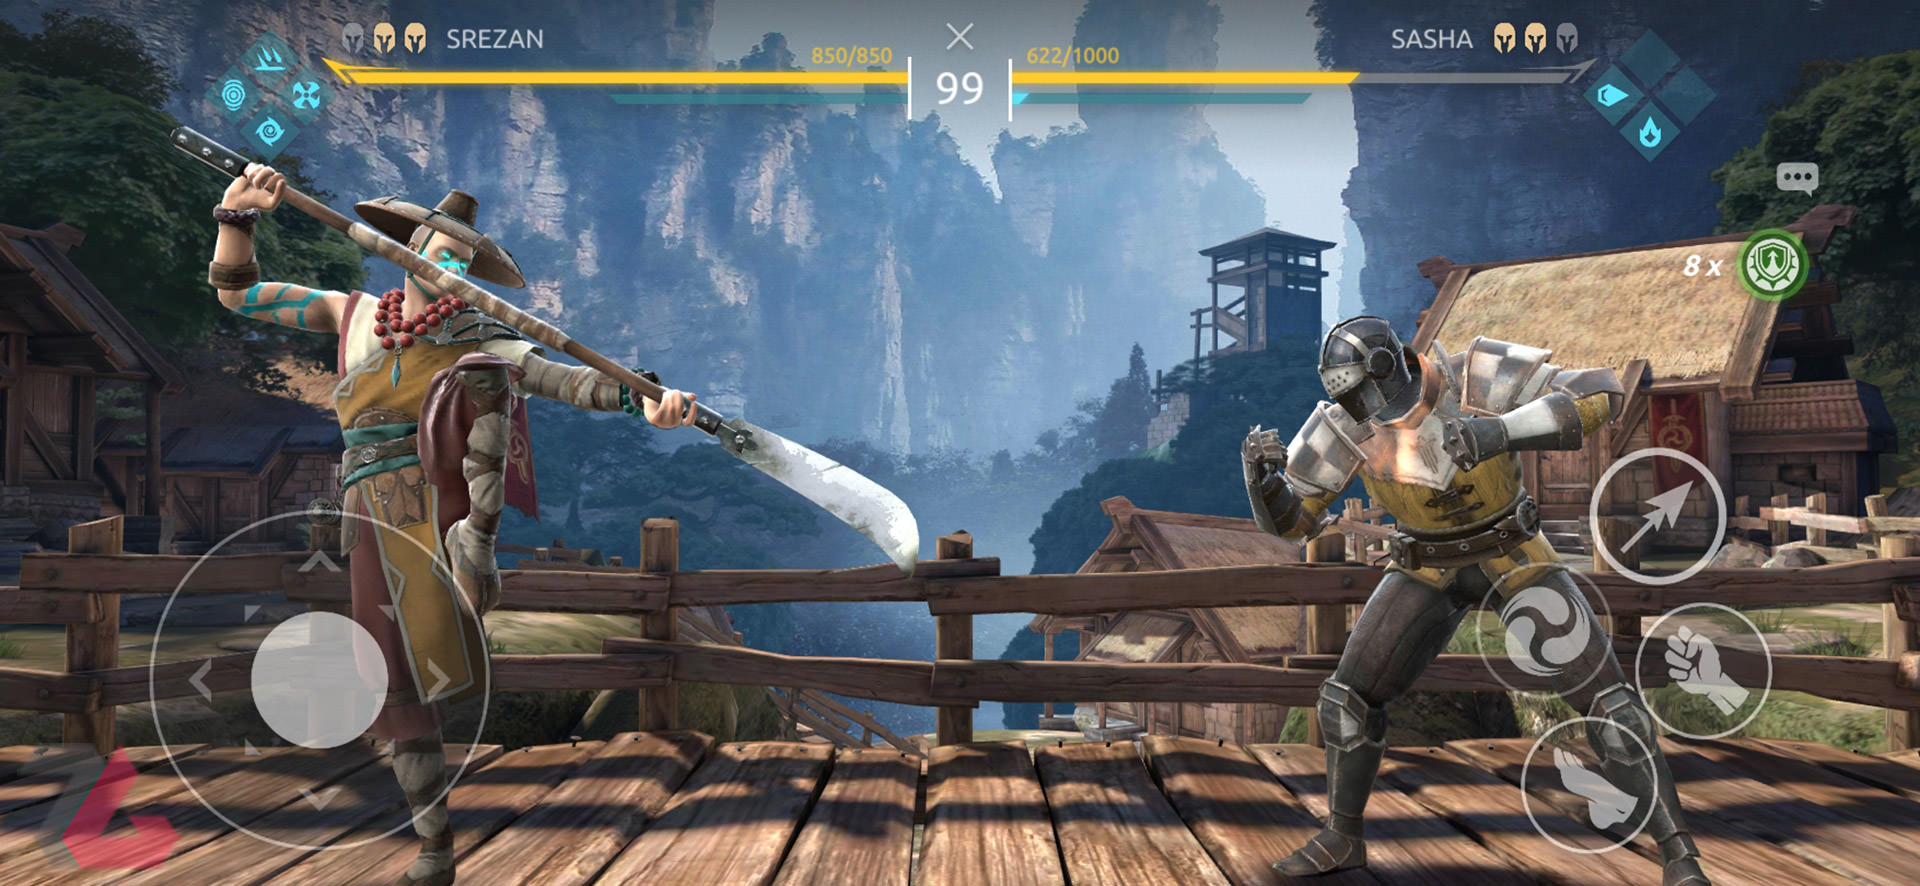 download shadow fight 4 arena download for free